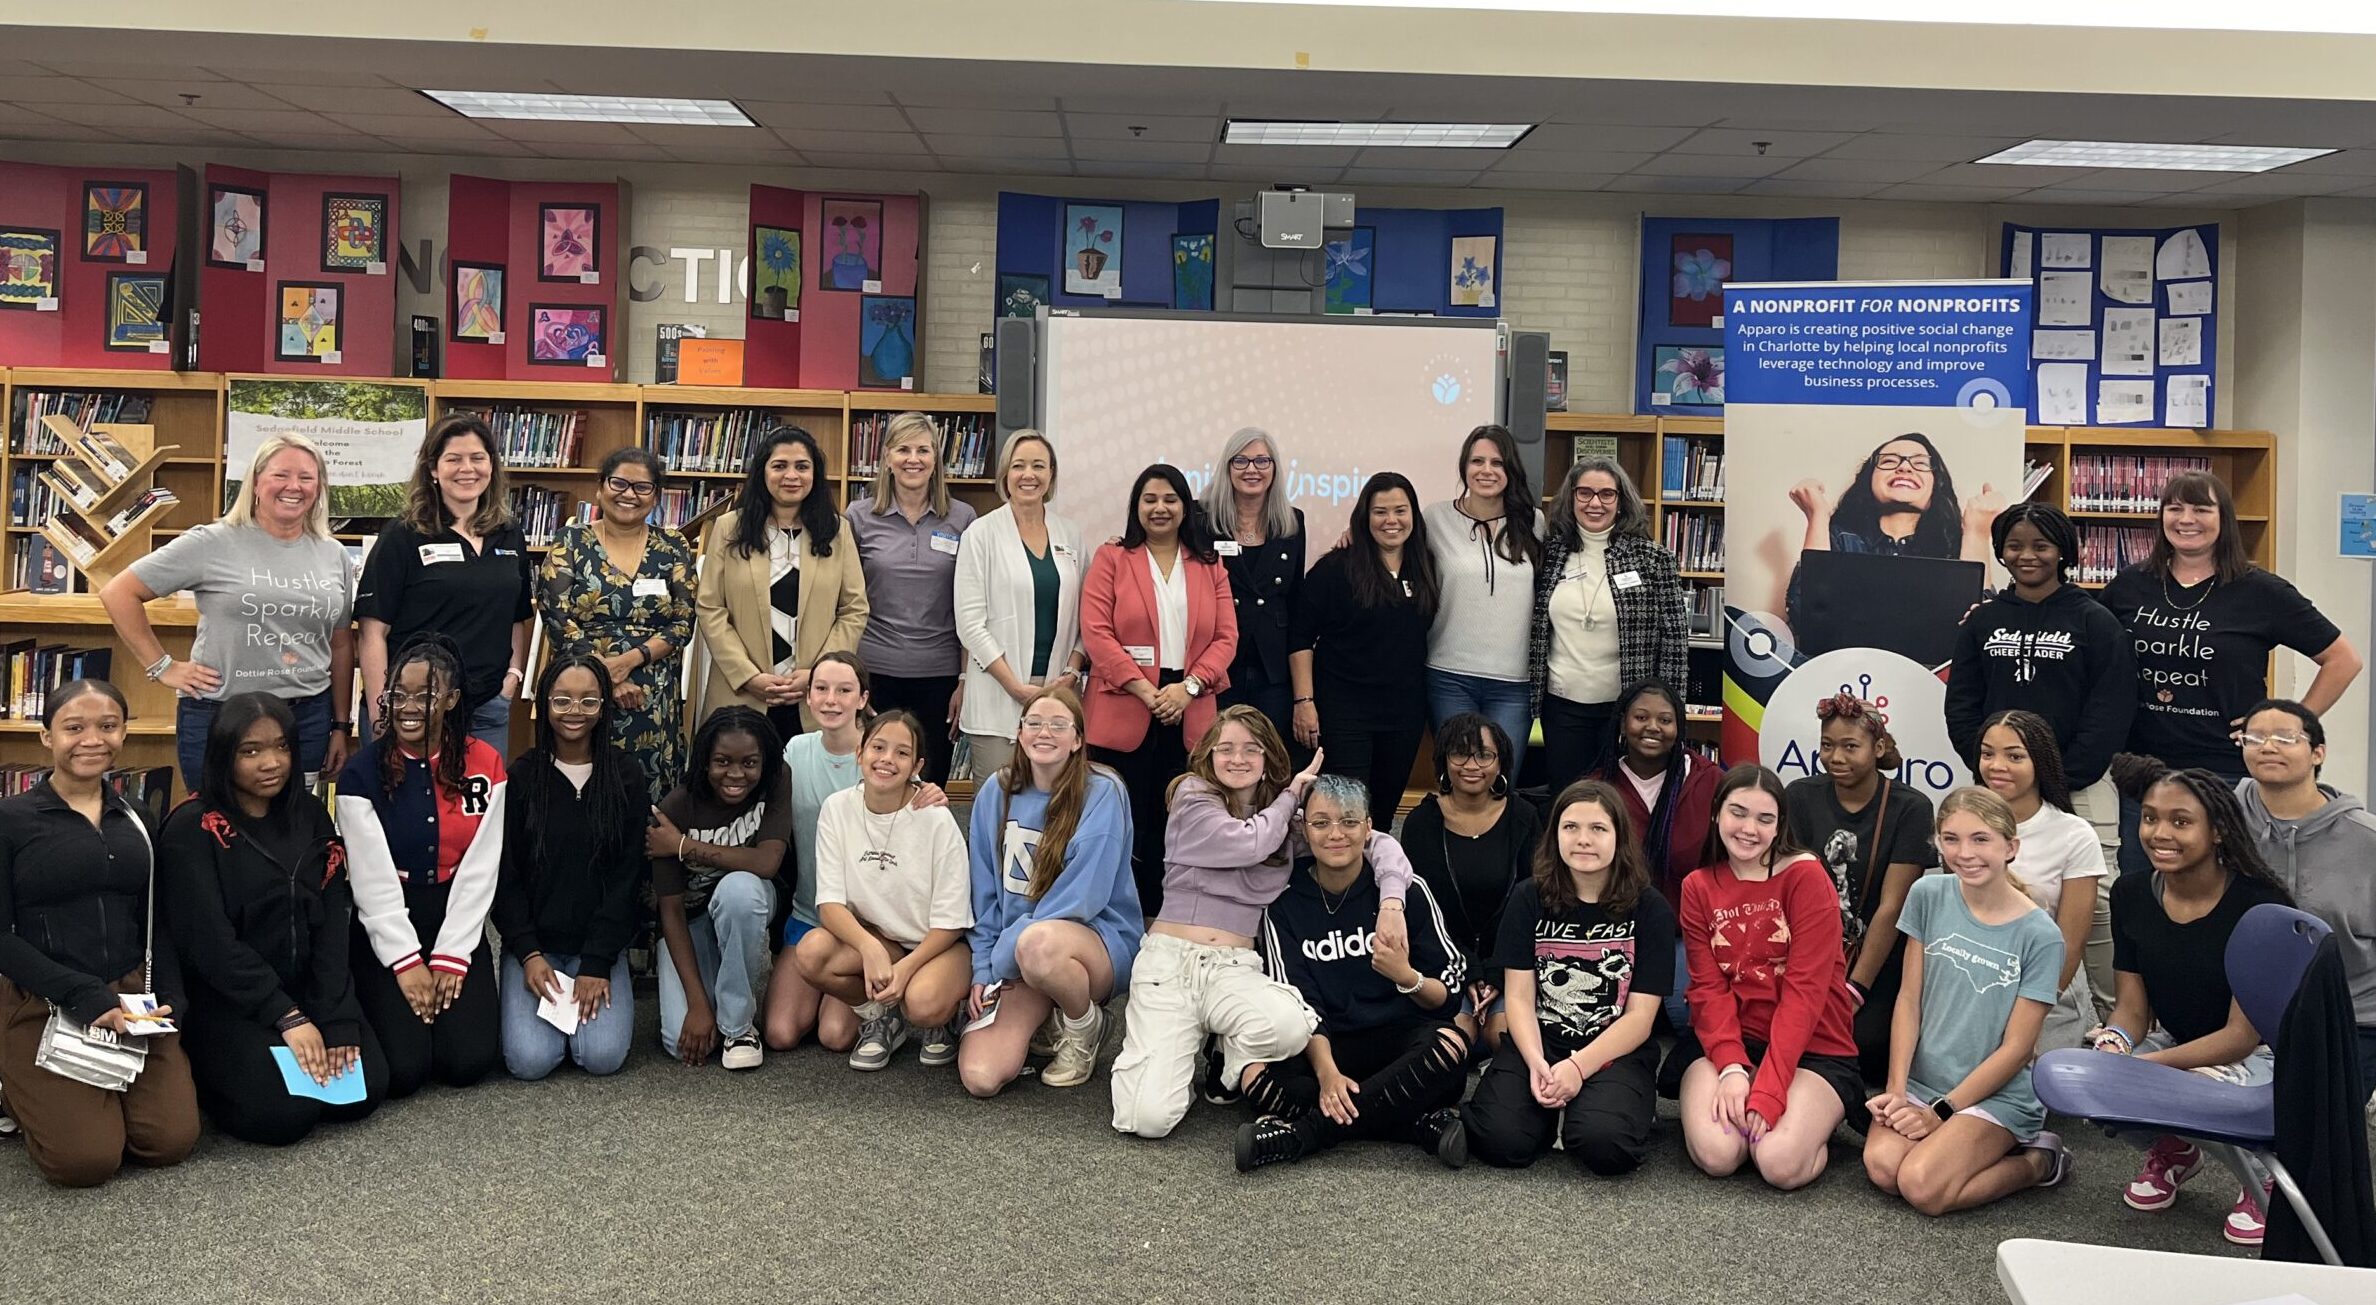 Apparo leadership and their community of tech leaders joins Dottie Rose Foundation at Sedgefield Middle School to engage with motivated STEM students.